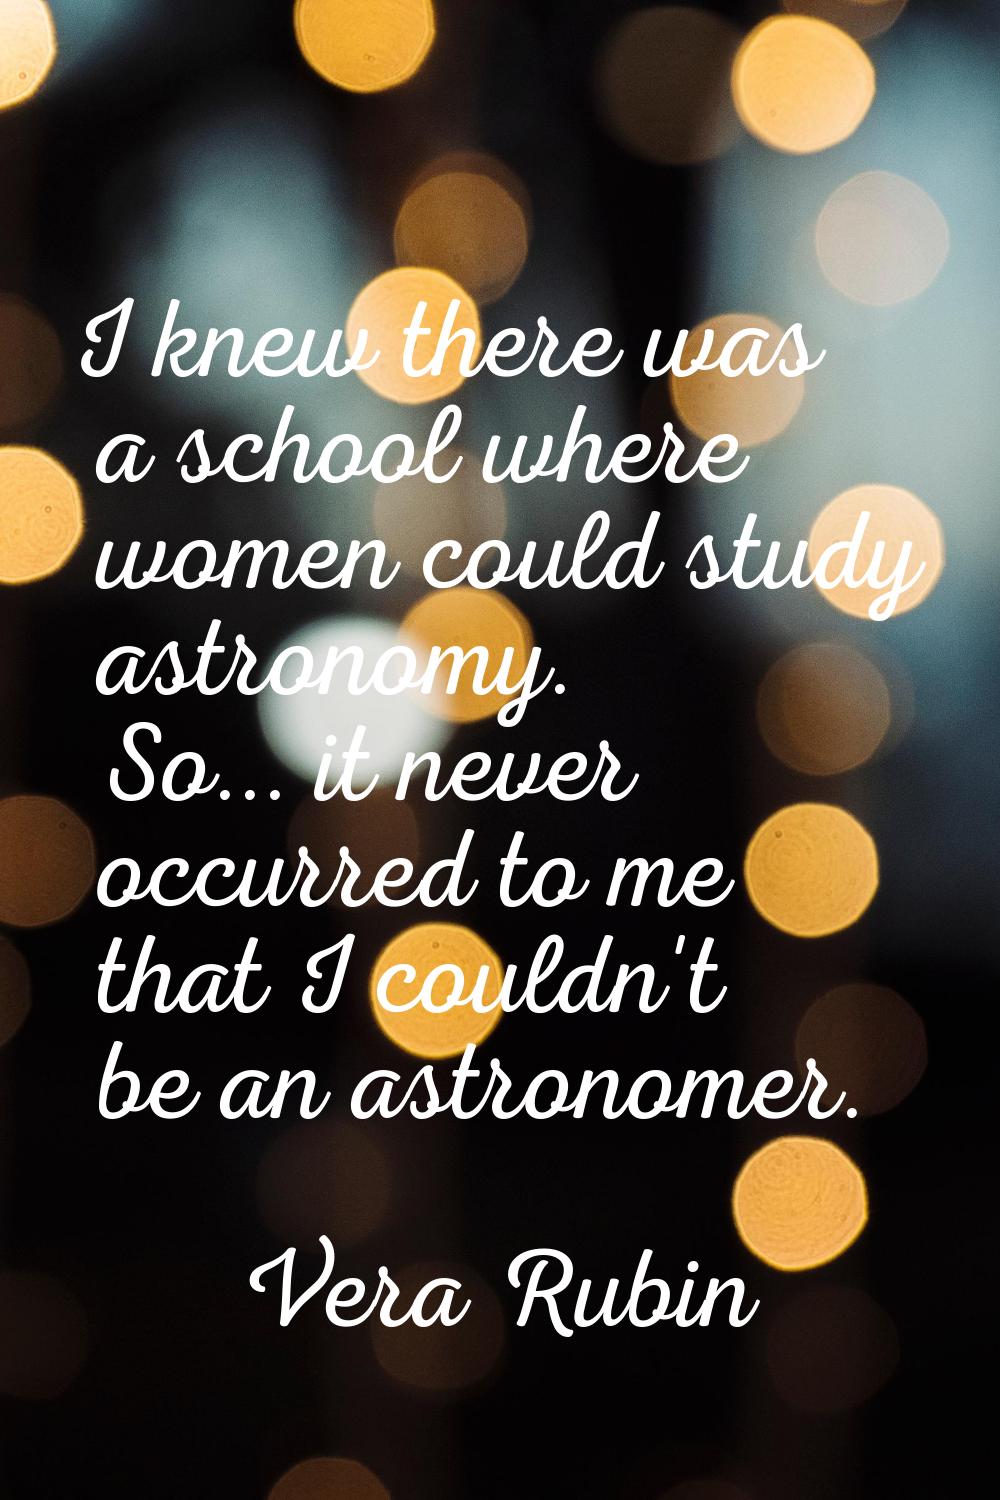 I knew there was a school where women could study astronomy. So... it never occurred to me that I c